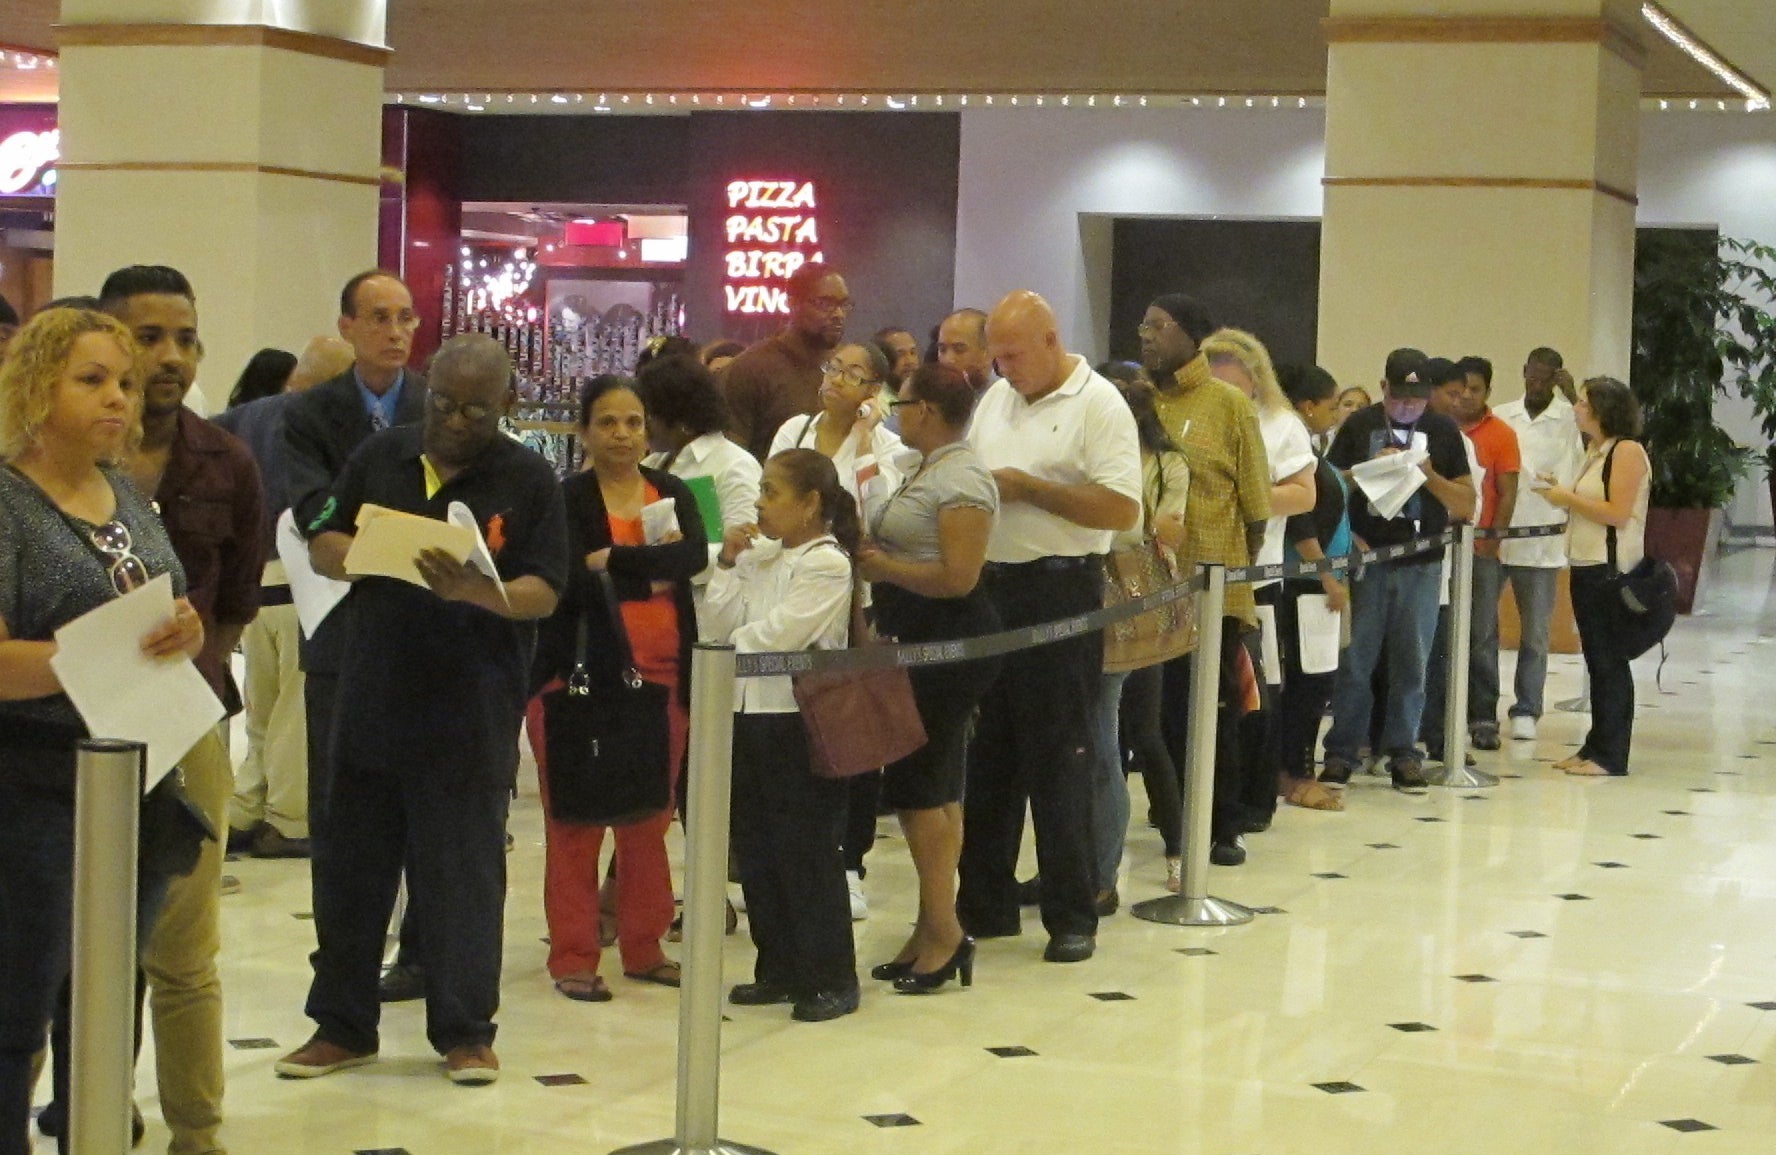 Applicants line up Wednesday at a job fair  in Atlantic City. Caesars International held the event at Bally's as it tries to fill more than 500 positions at its casinos in Atlantic City